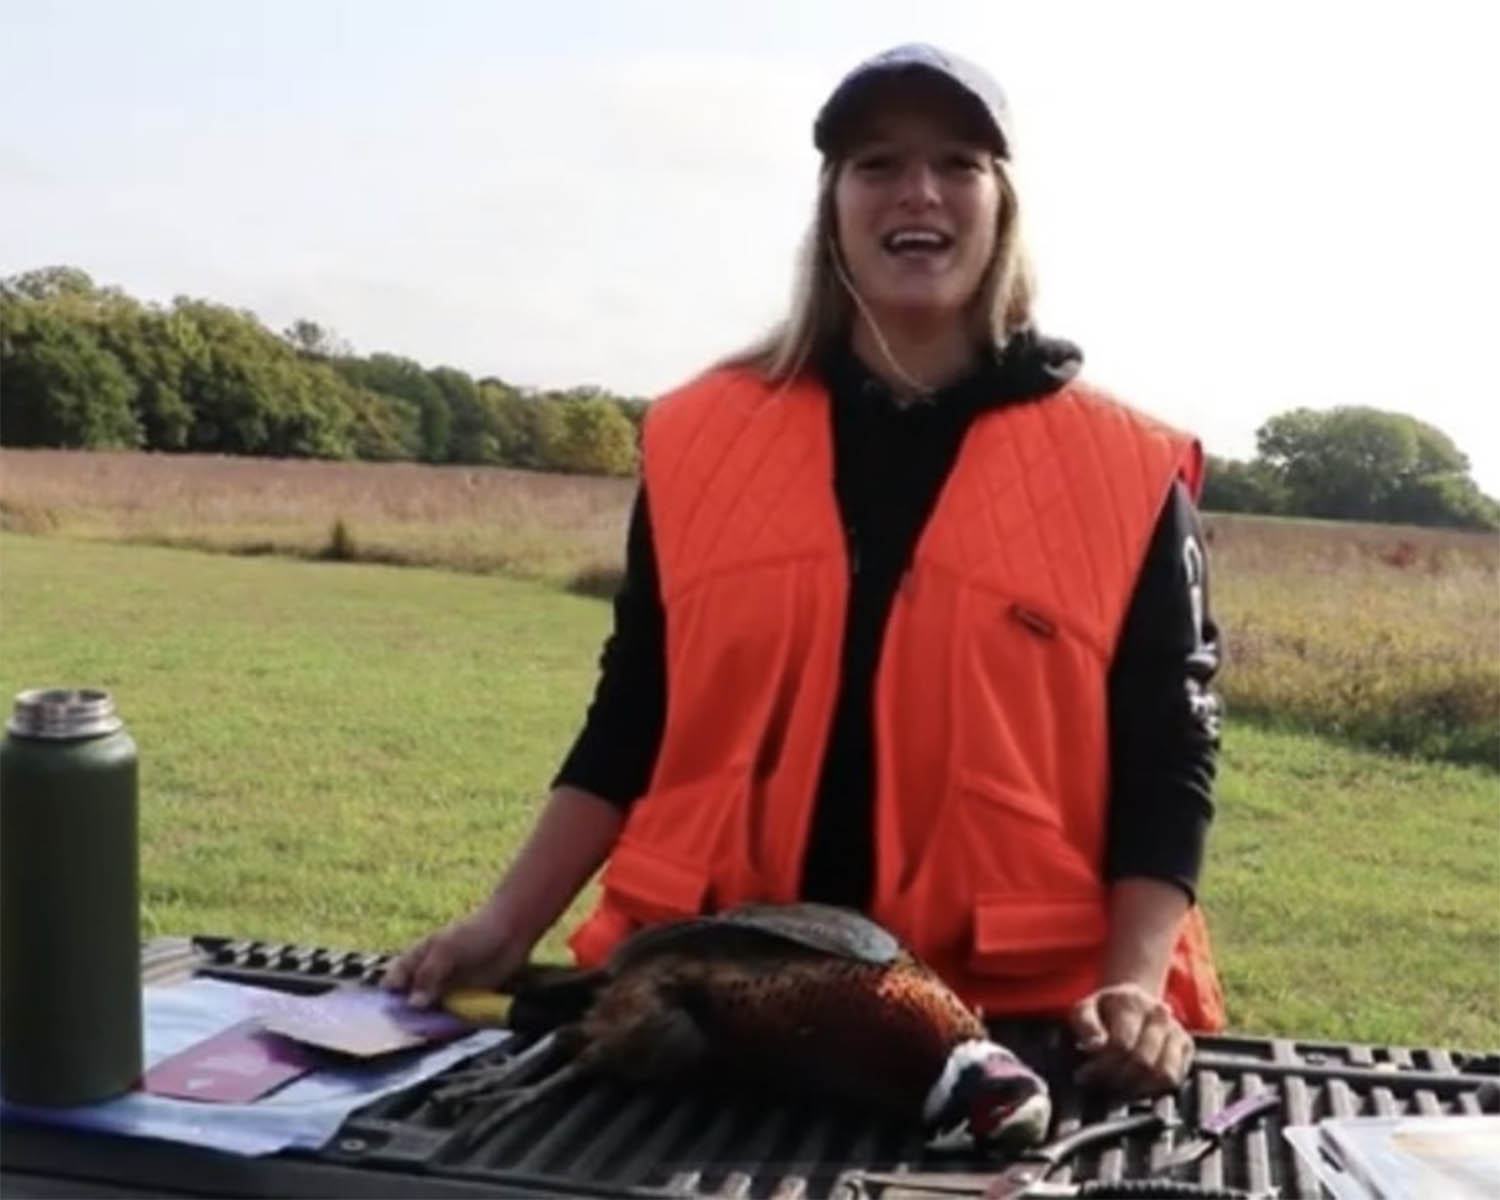 As part of her Cabela's Apprenticeship Program project experience, SNR alum Sophia Gobber helped develop a podcast and video series called "She Goes Outdoors."